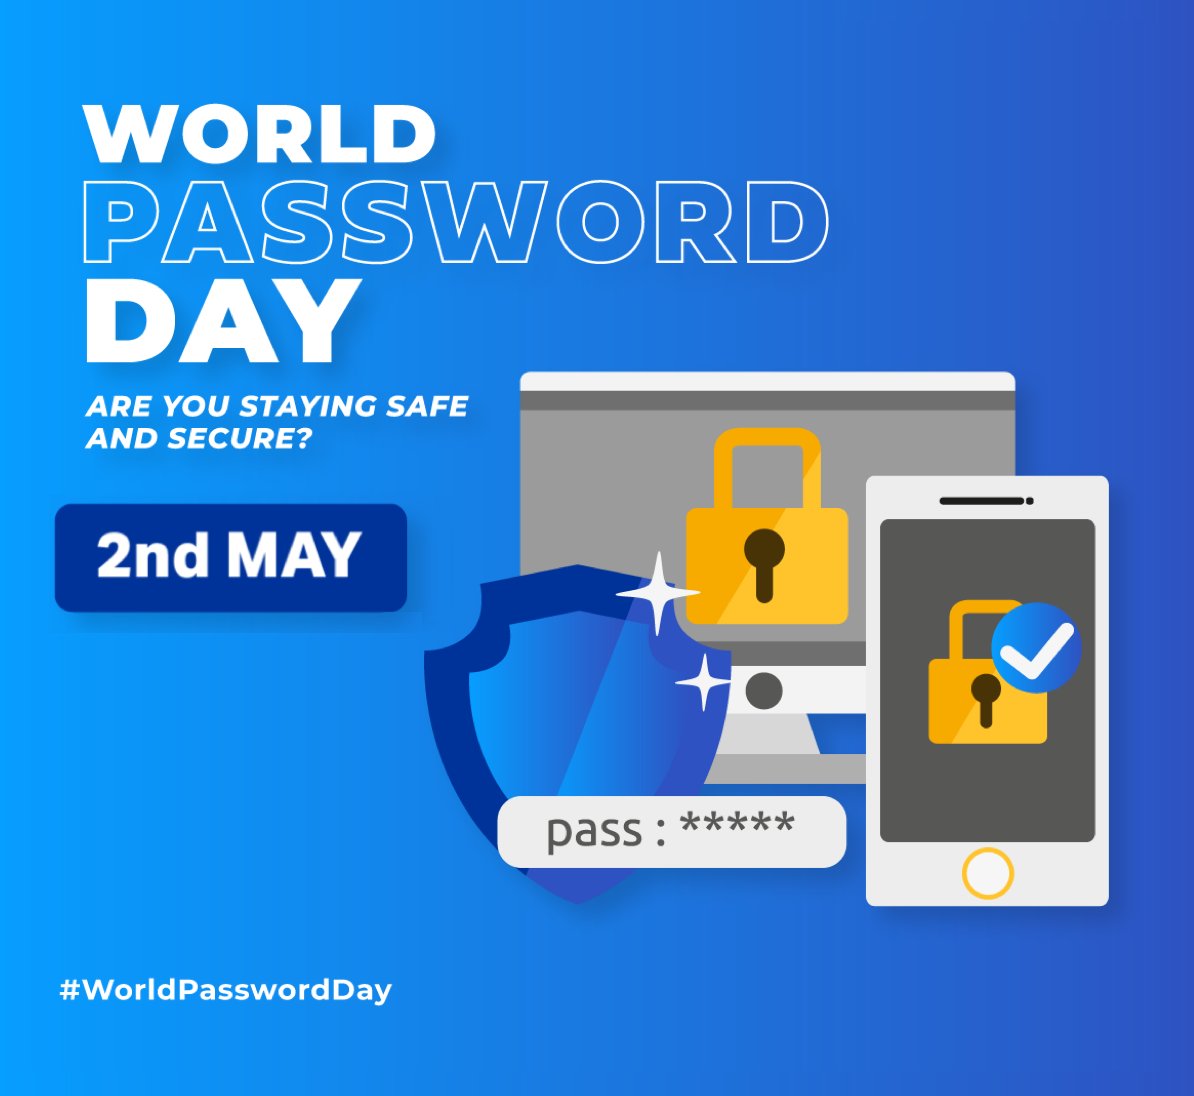 Happy #WorldPasswordDay to all. I know it's a pain to change all those passwords, but why take the risk of keeping them unchanged? It's always best to lower your risk... preferably #ZeroRisk

#ZeroRiskNovel #NewCrime #NewThrillers